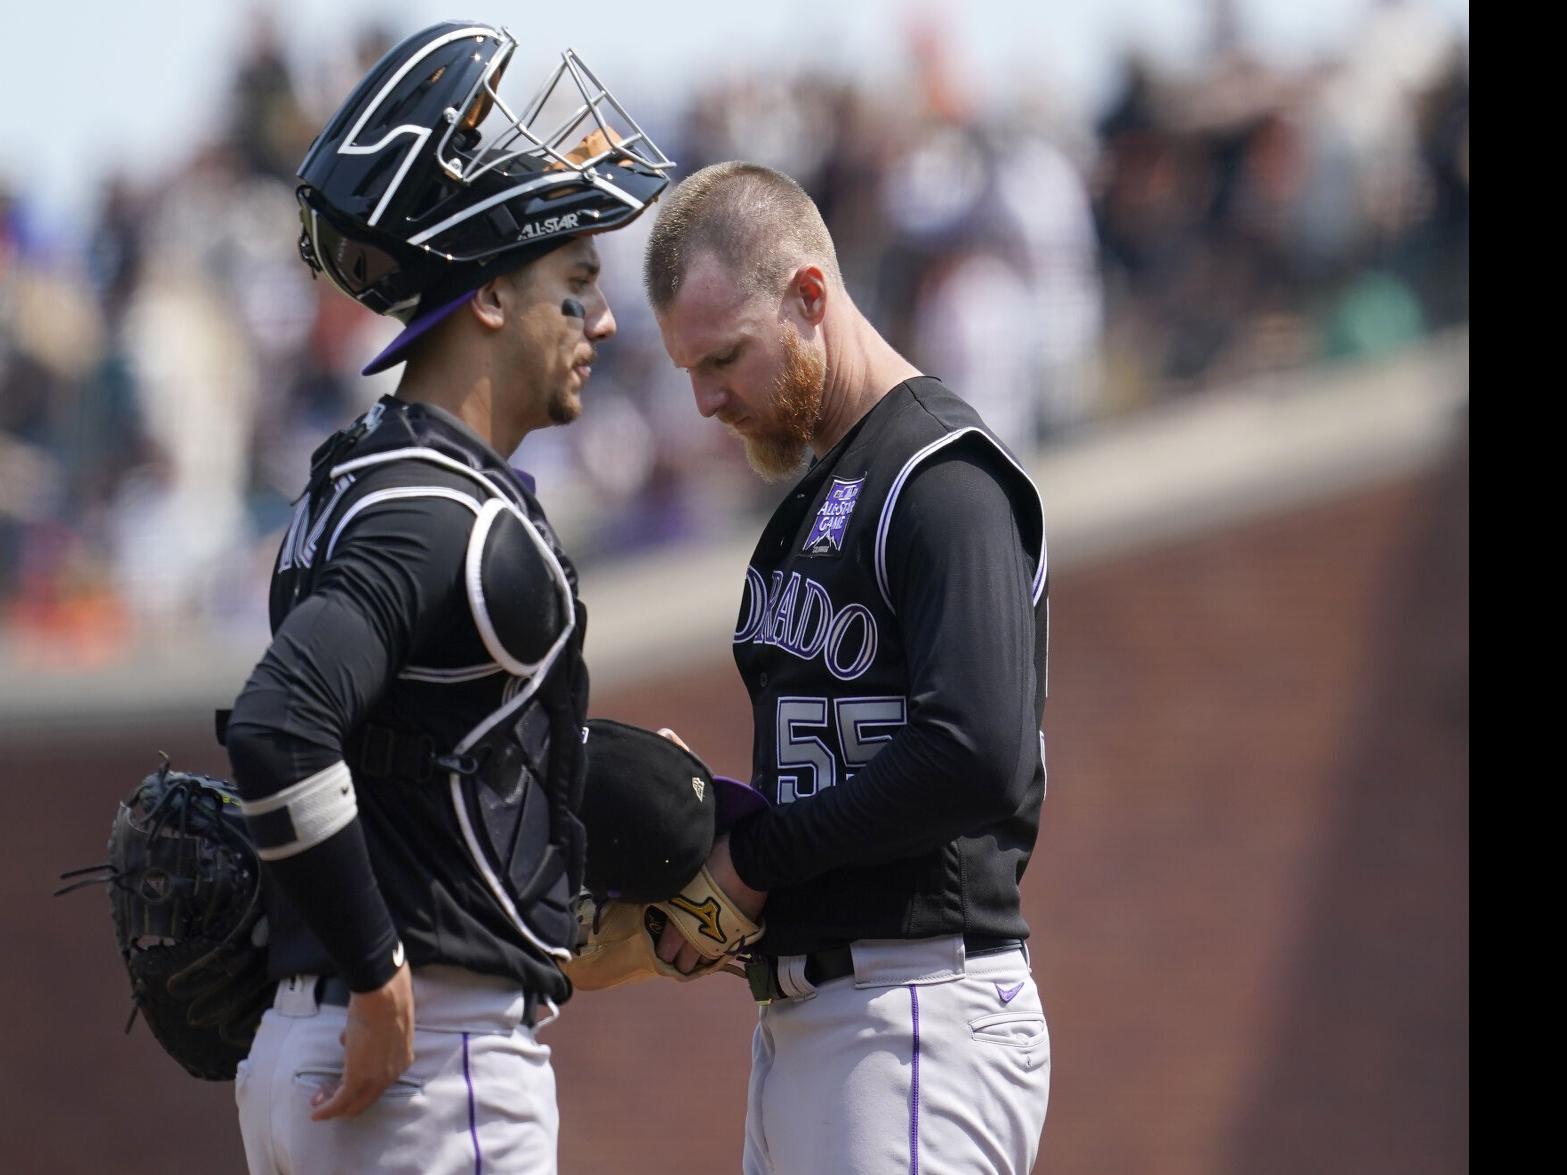 Another promising start goes astray for Jon Gray as the Rockies fall to the  Giants